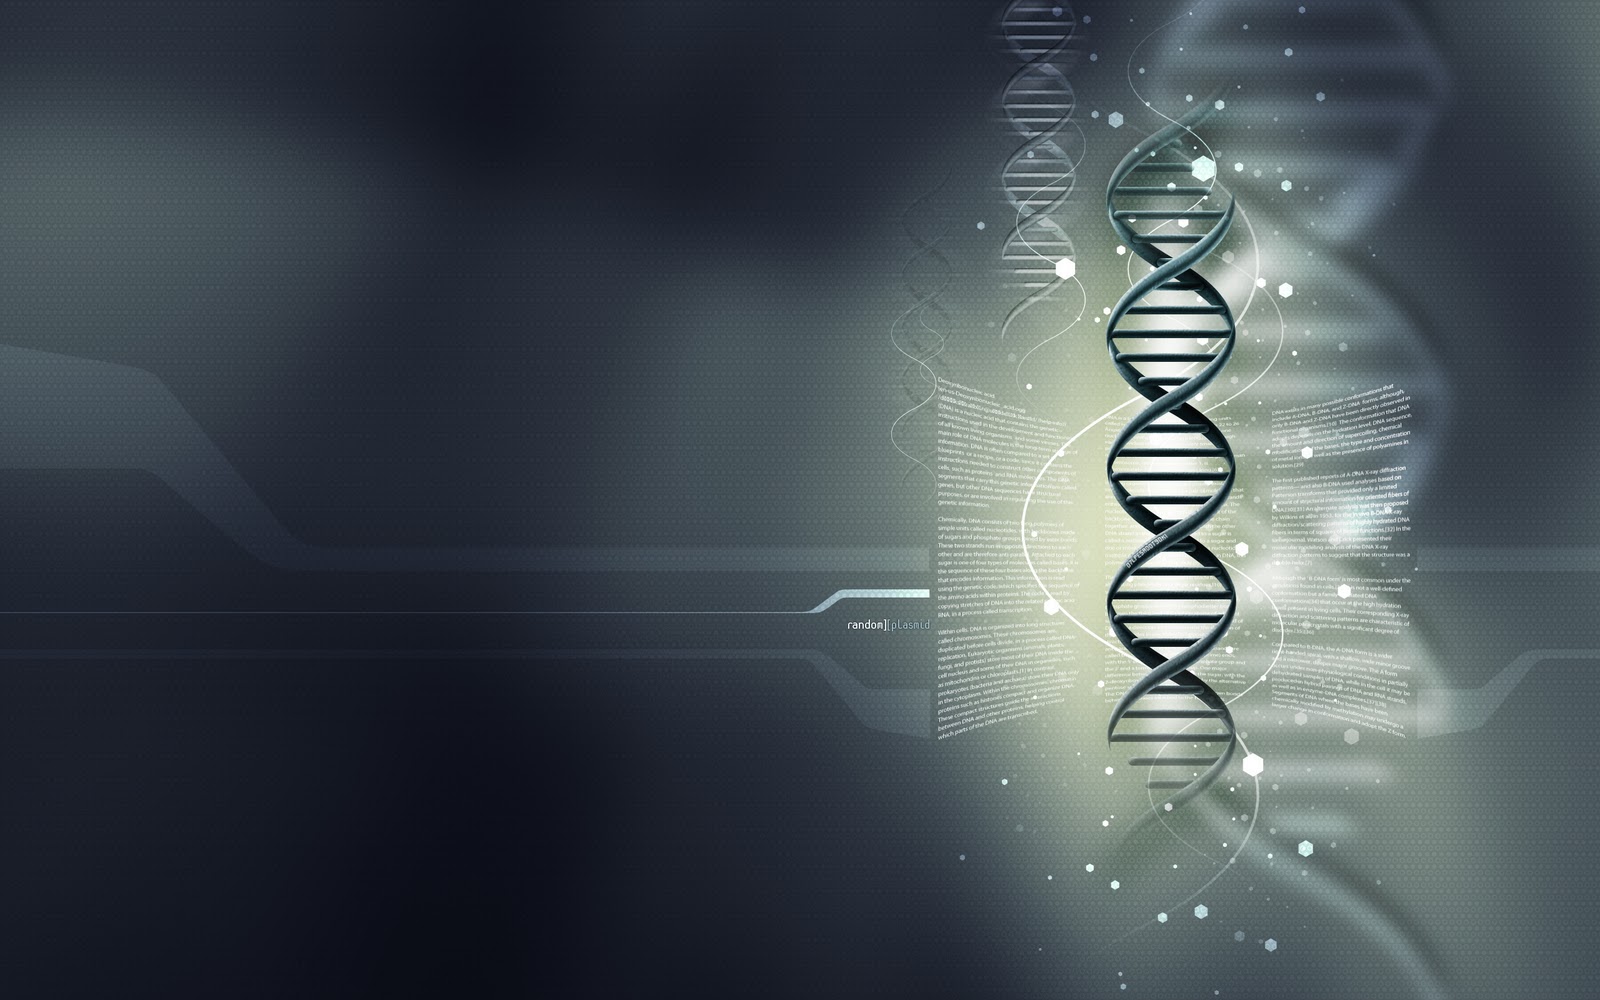 Source URL: http://nupemagazine.org/science-dna-wallpapers/